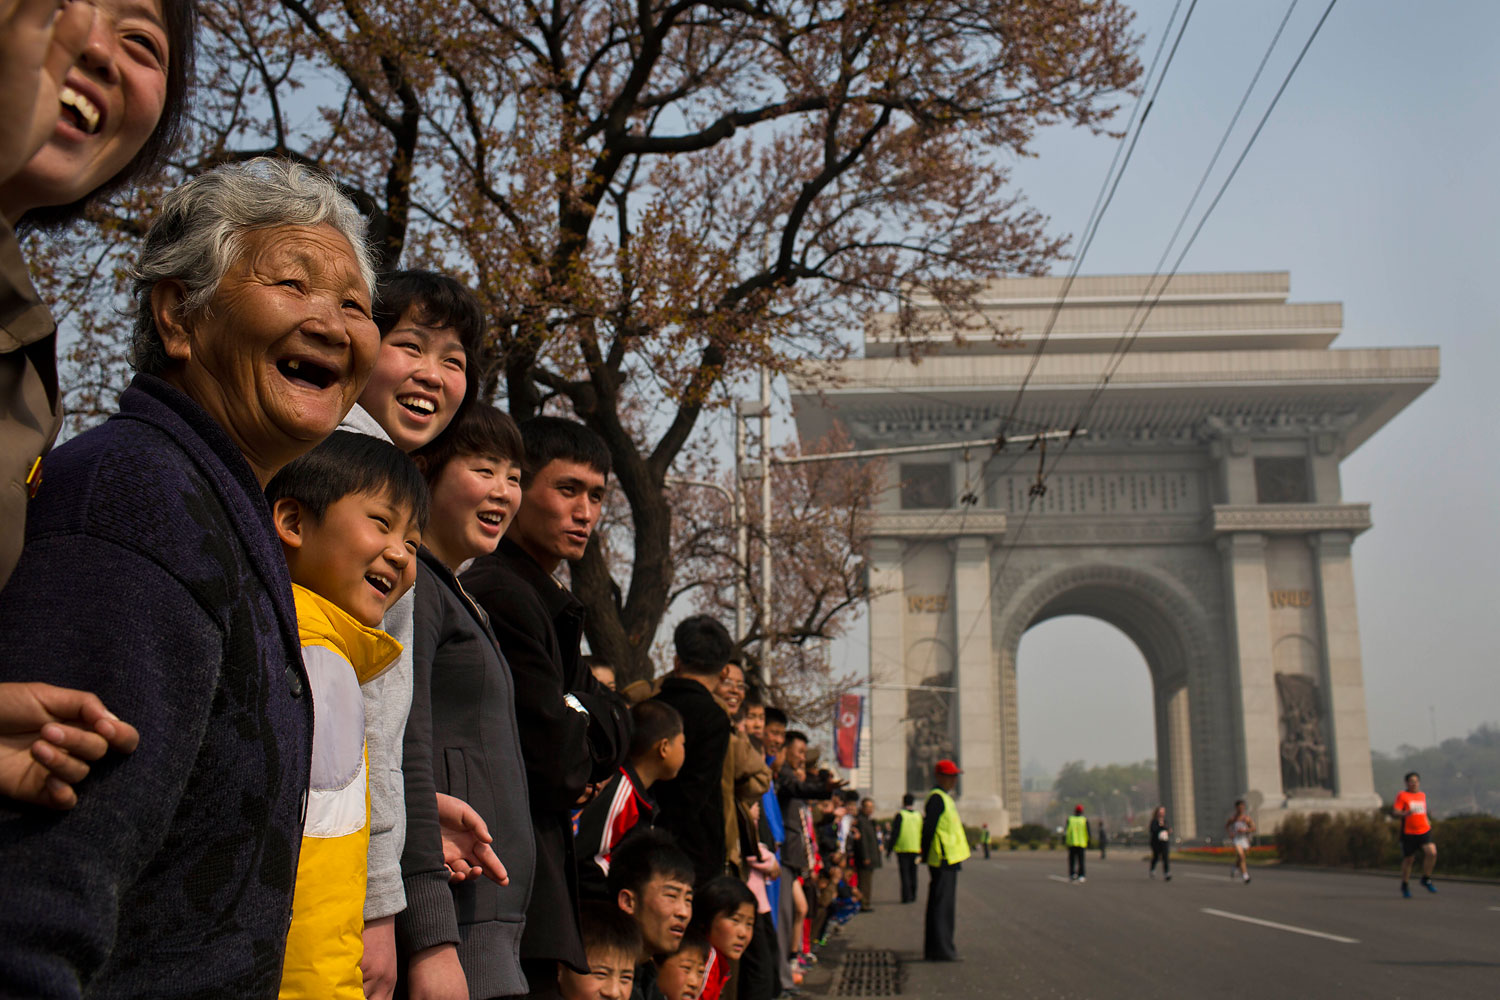 North Korean spectators watch from the roadside in central Pyongyang as runners pass by during the Mangyongdae Prize International Marathon in Pyongyang, April 13, 2014.